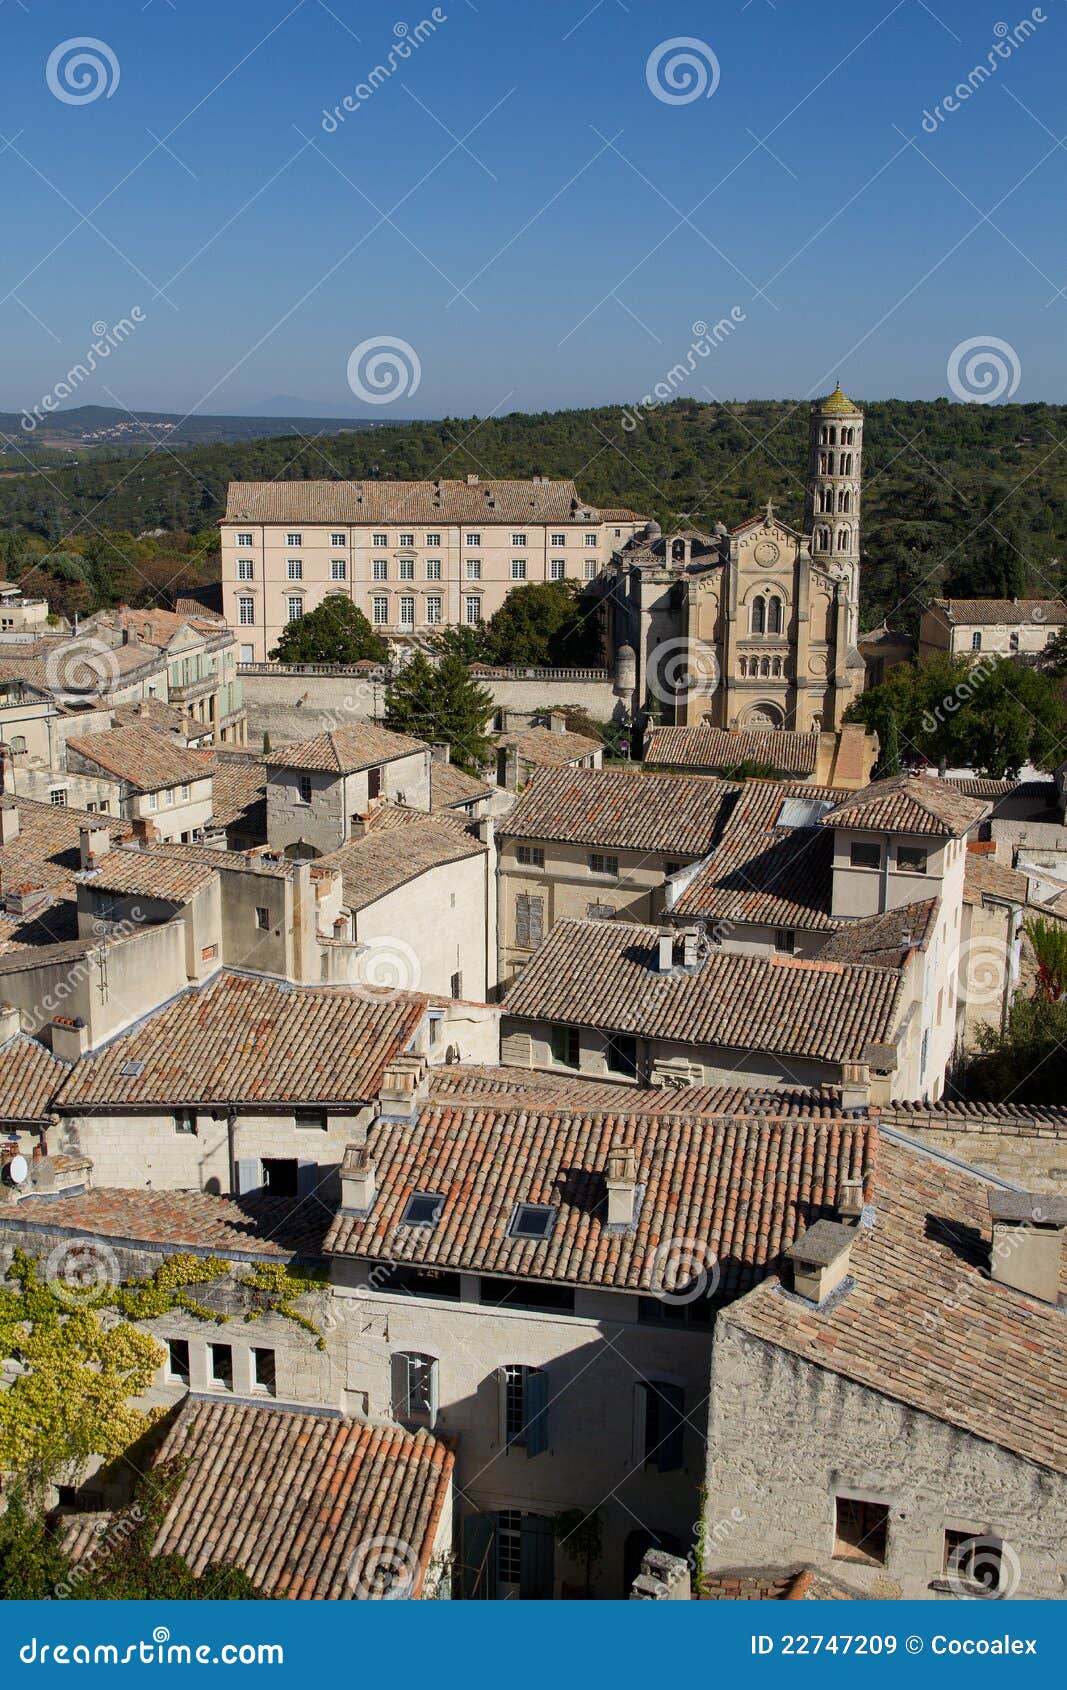 ales, france: image with the city seen from above